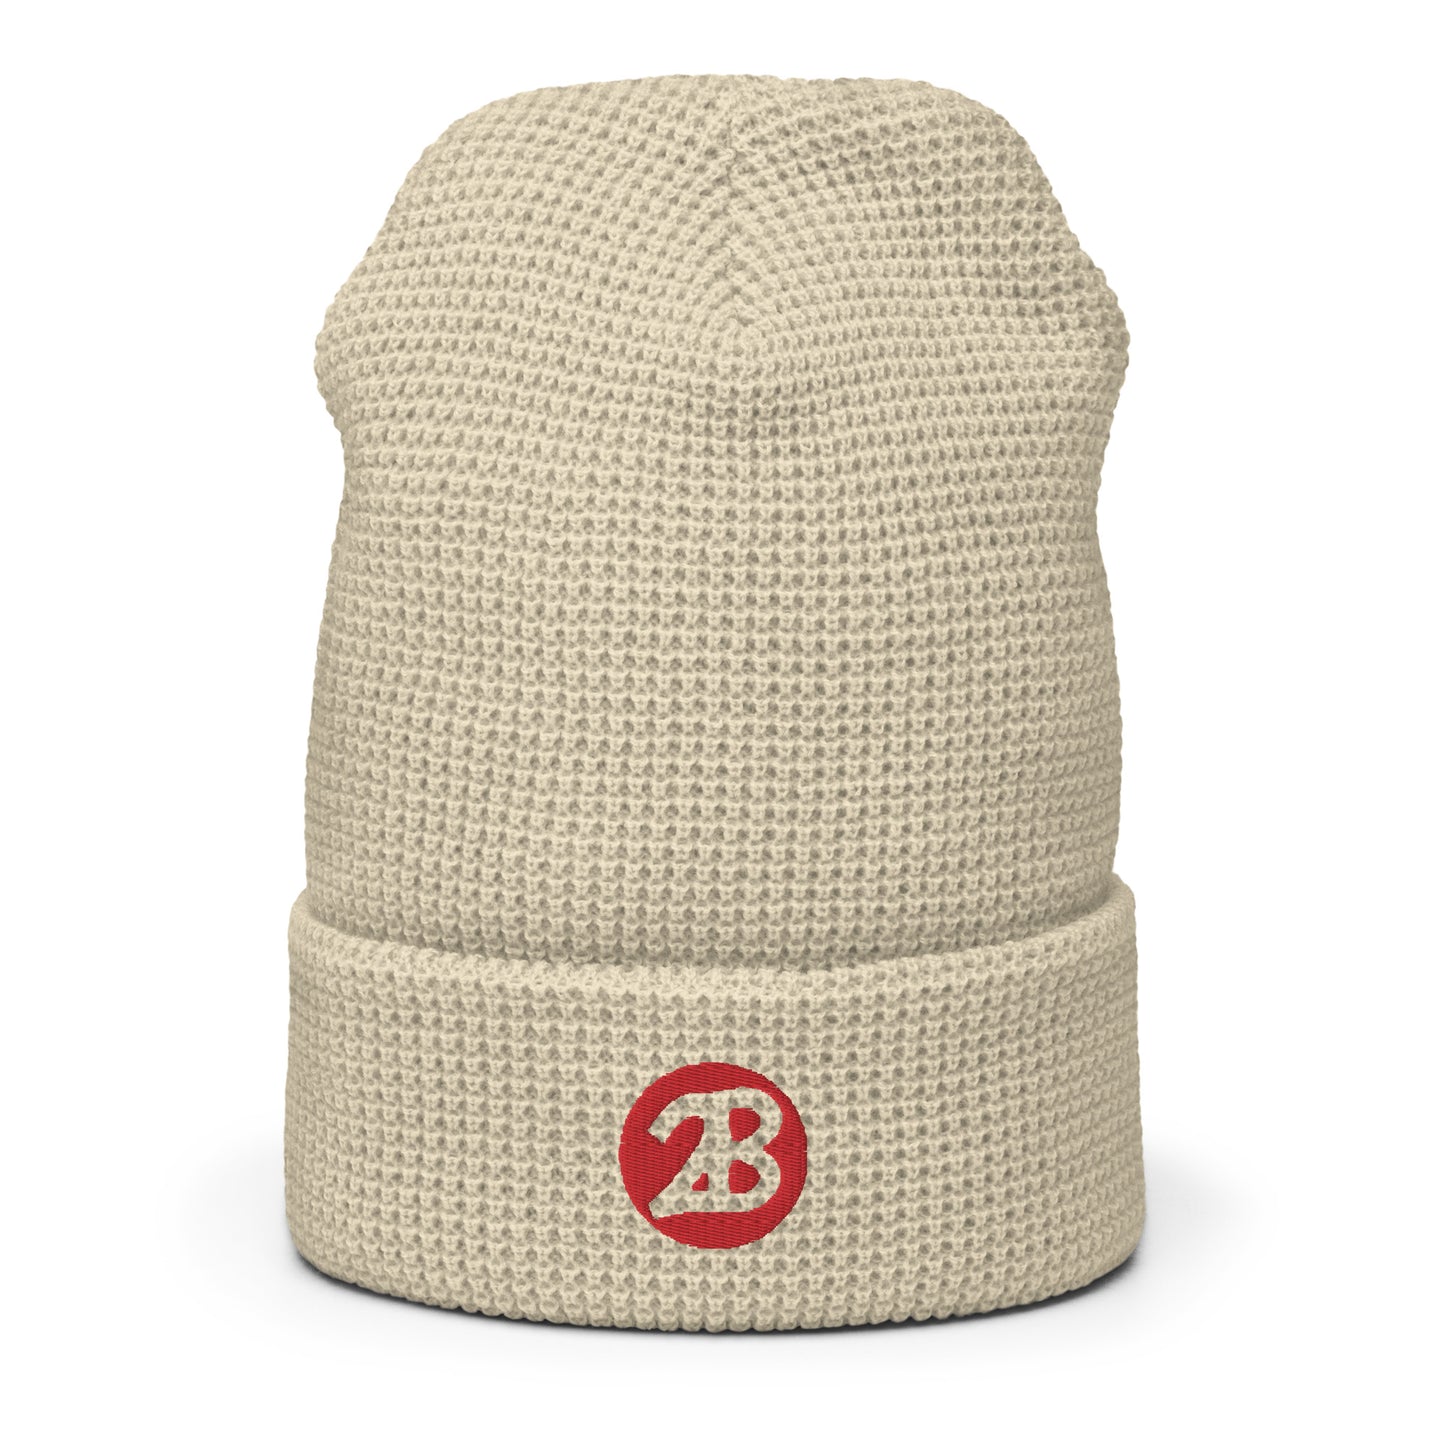 2Bdiscontinued. embroidered richardson waffle beanie 2B